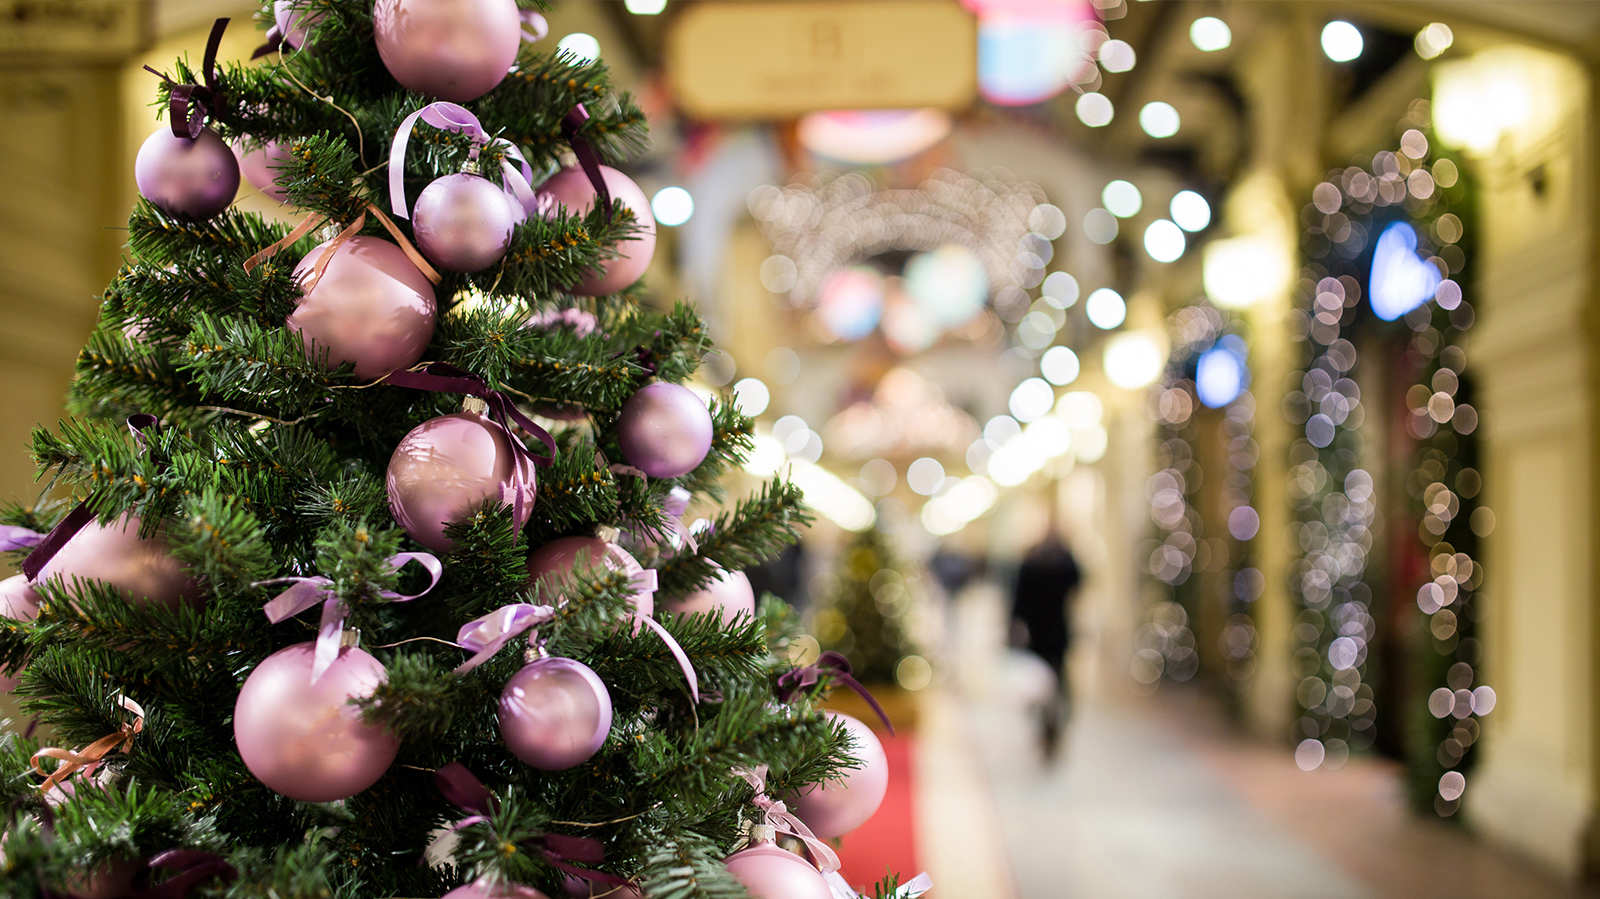 5 places to shop for a change this Christmas